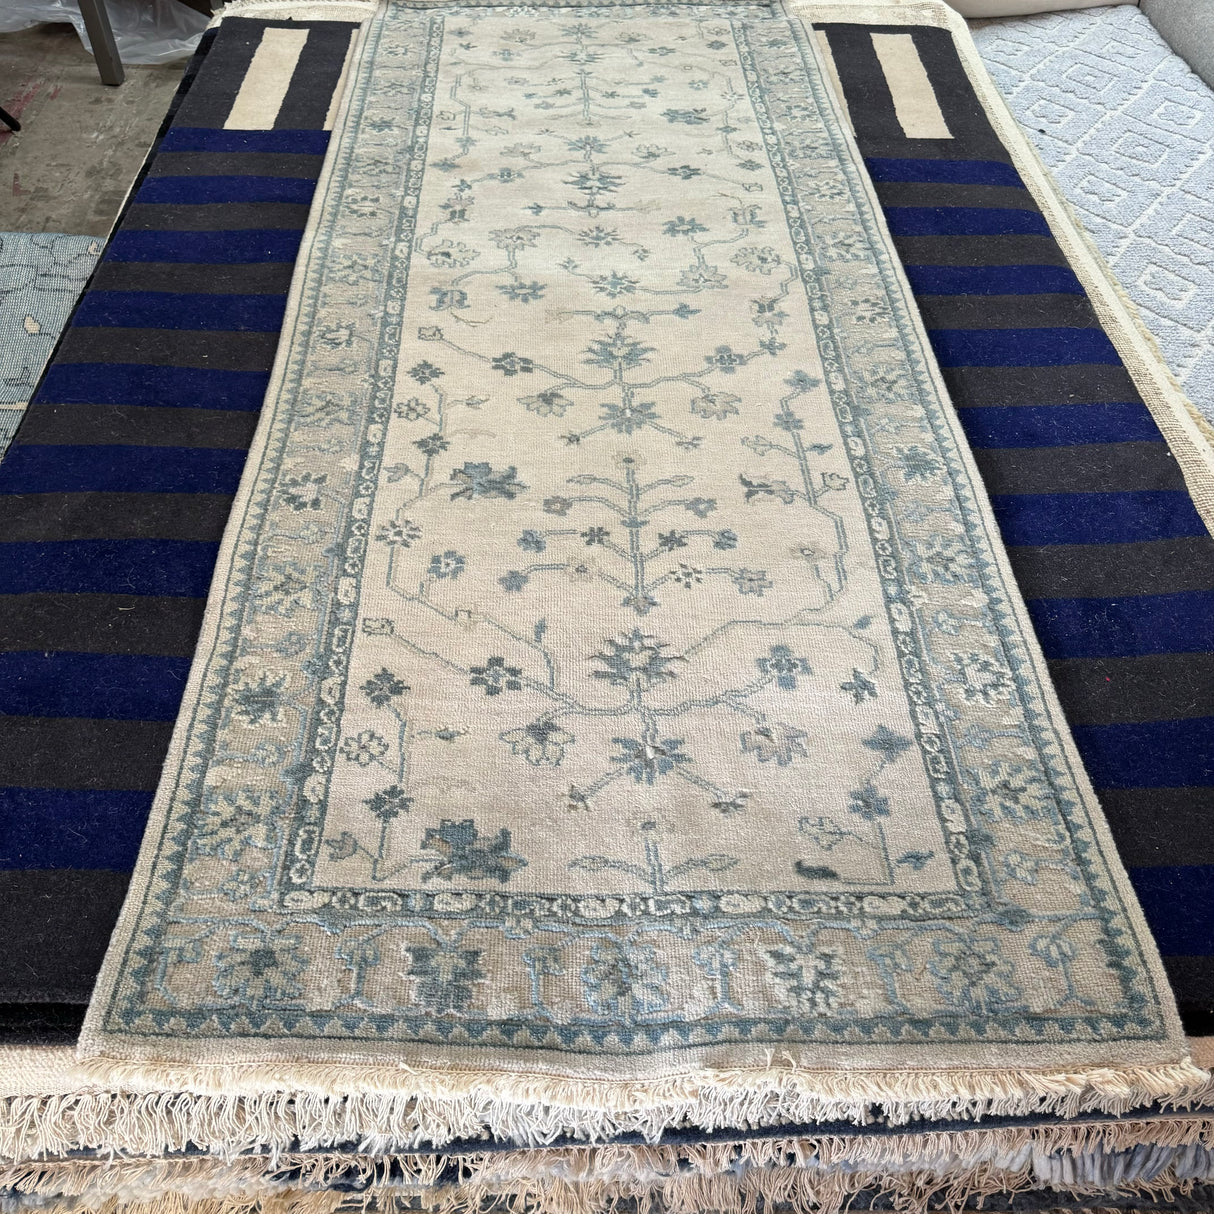 Serena and Lily Hand Knotted Runner Rug 3.5X9